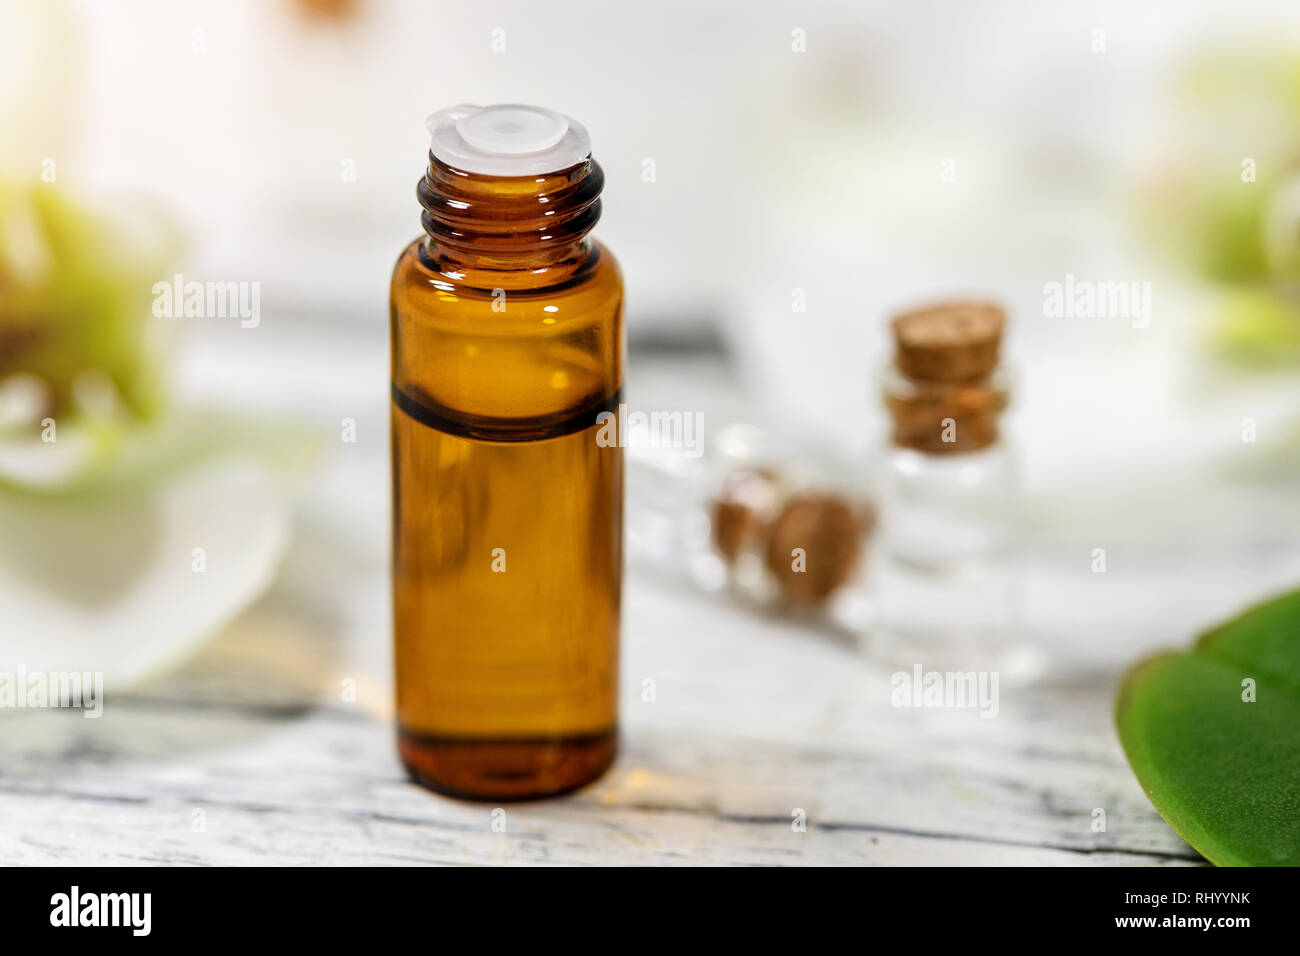 aromatherapy - floral essential oil bottle Stock Photo